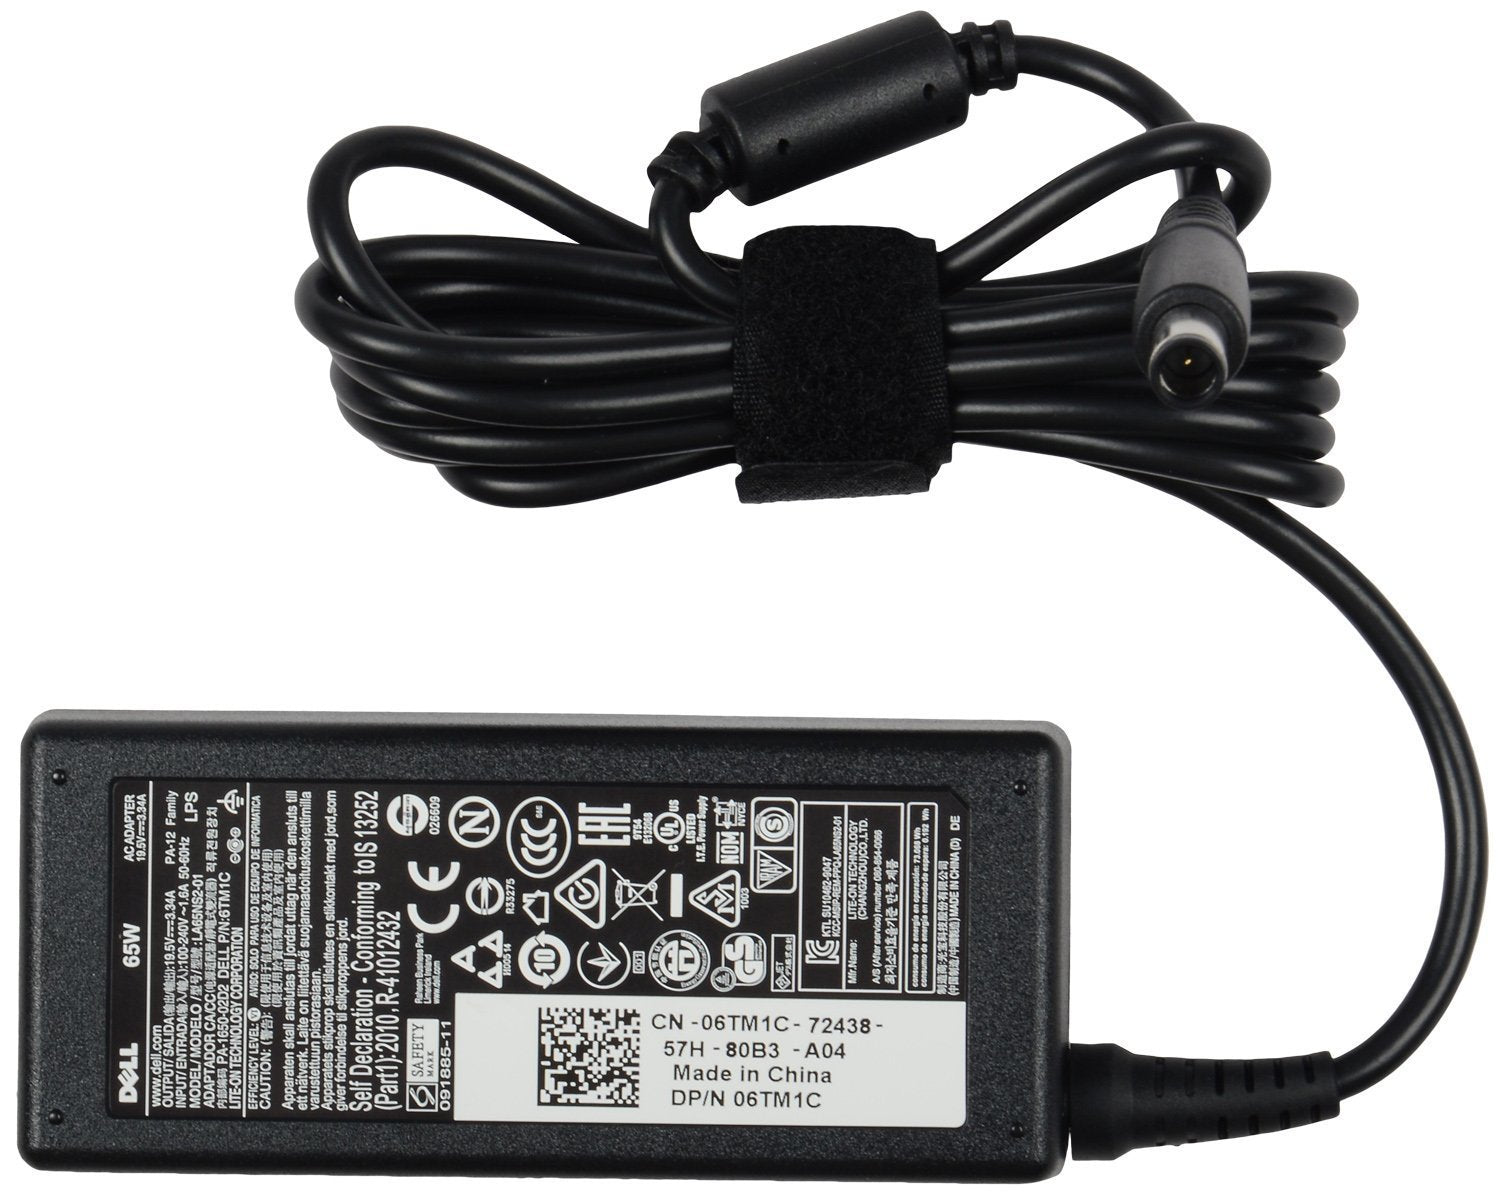 dell original 65w 19.5v adapter charger for inspiron 15 3521 inspiron 15r 5520 5537- Black